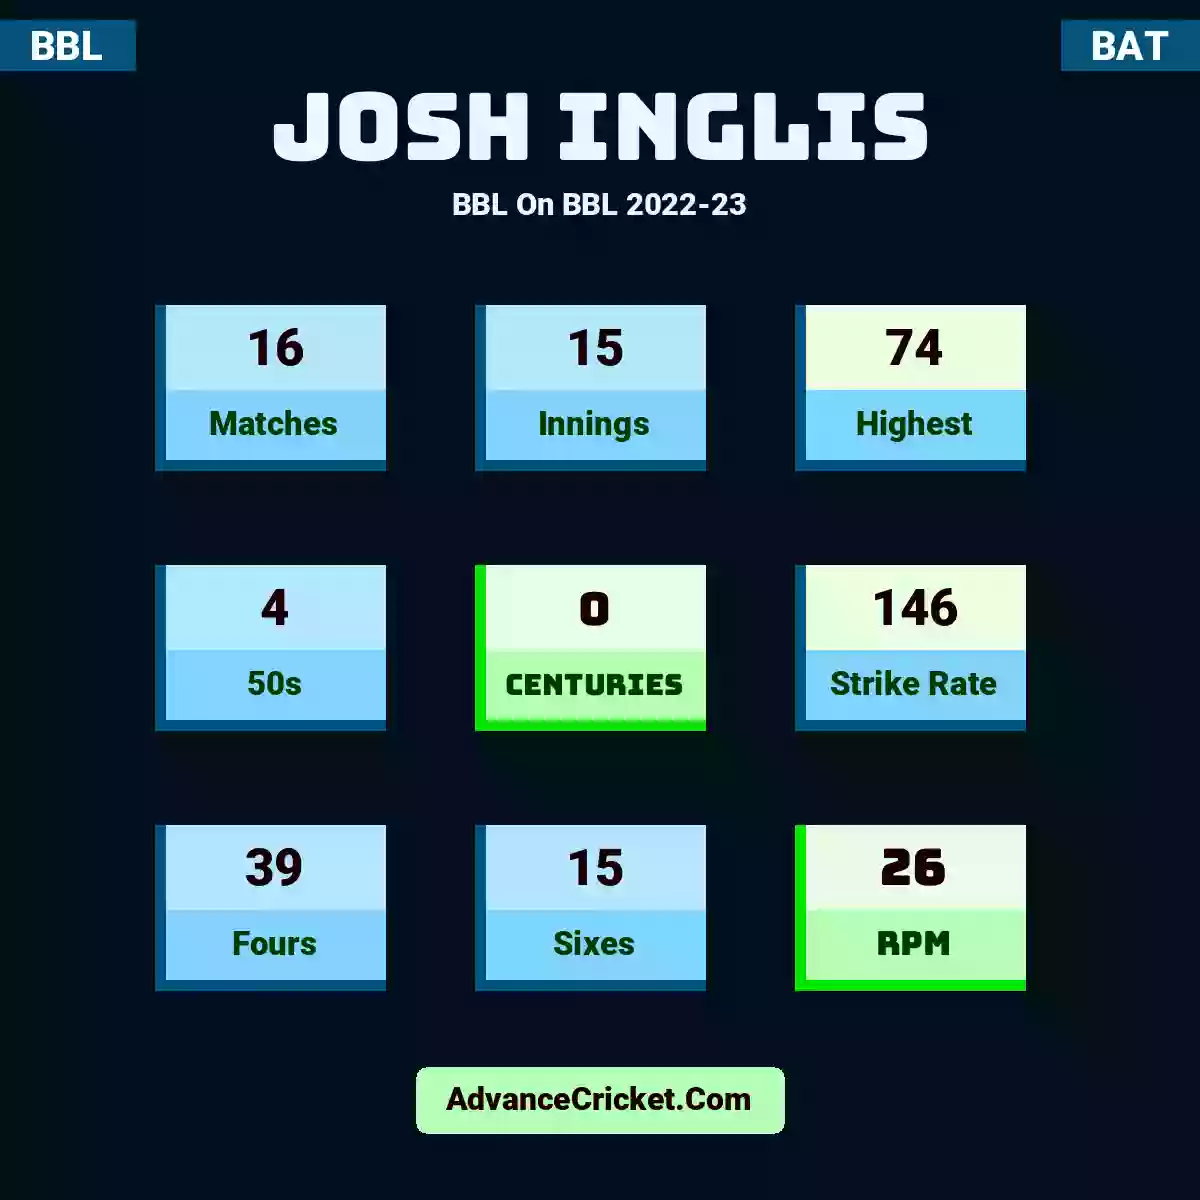 Josh Inglis BBL  On BBL 2022-23, Josh Inglis played 16 matches, scored 74 runs as highest, 4 half-centuries, and 0 centuries, with a strike rate of 146. J.Inglis hit 39 fours and 15 sixes, with an RPM of 26.